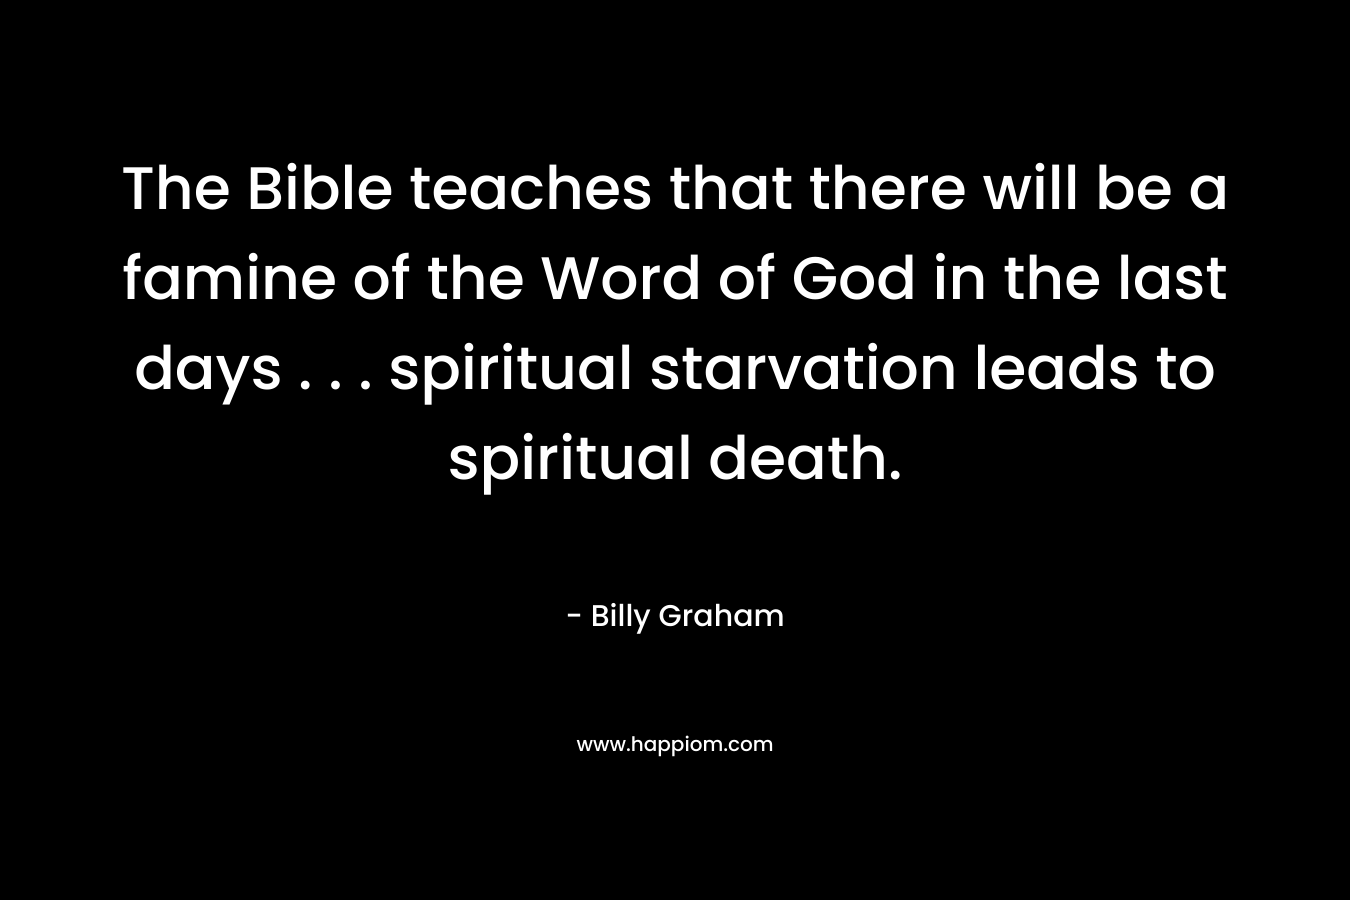 The Bible teaches that there will be a famine of the Word of God in the last days . . . spiritual starvation leads to spiritual death. – Billy Graham